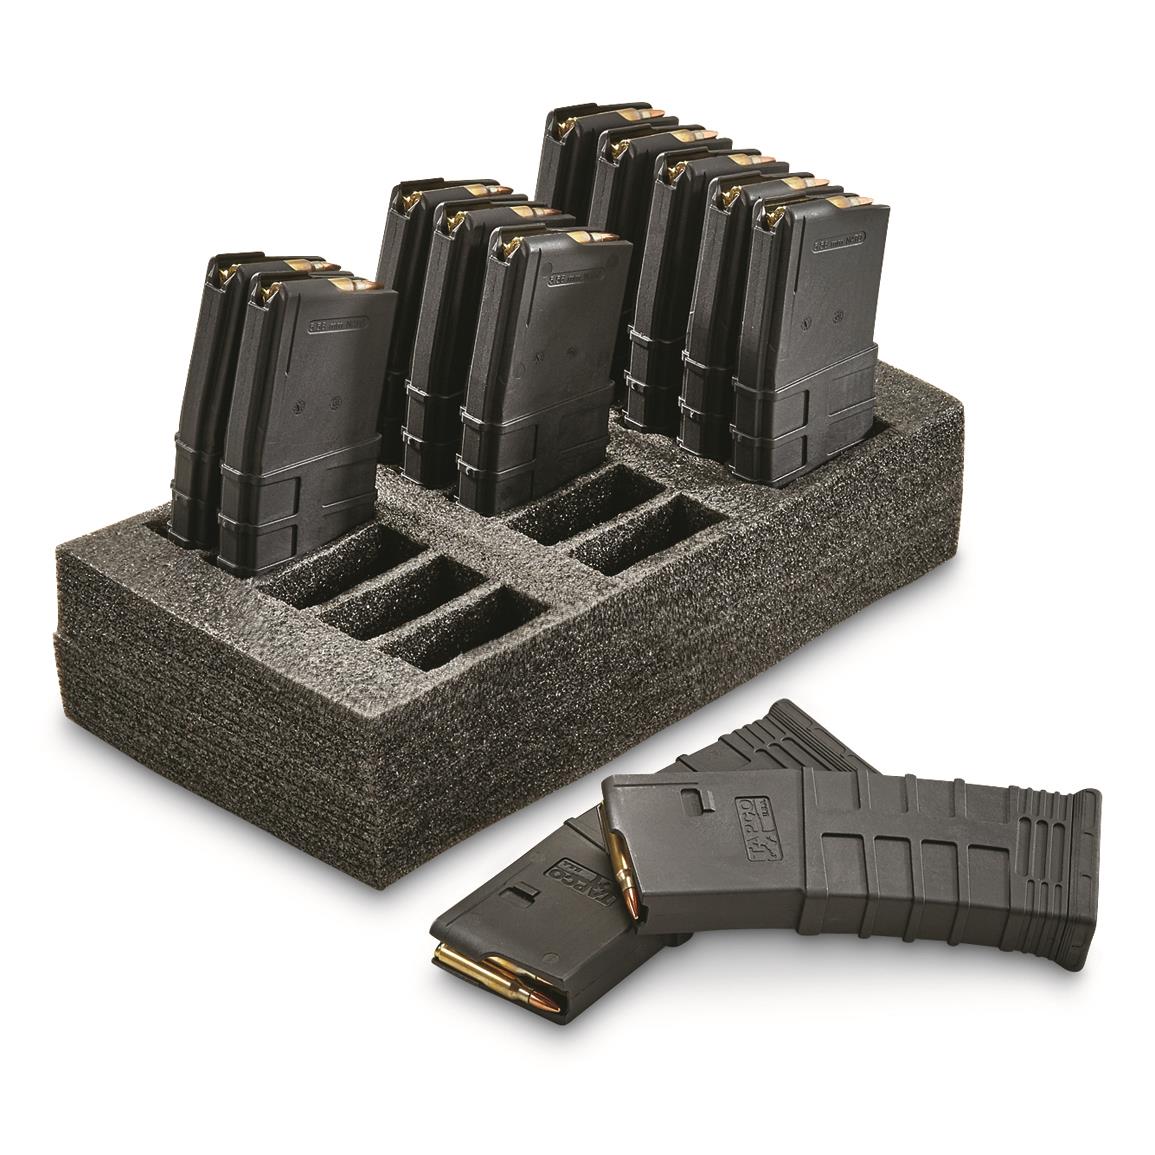 HQ ISSUE Ammo Can Mag Holder Foam Insert. (mags not included)